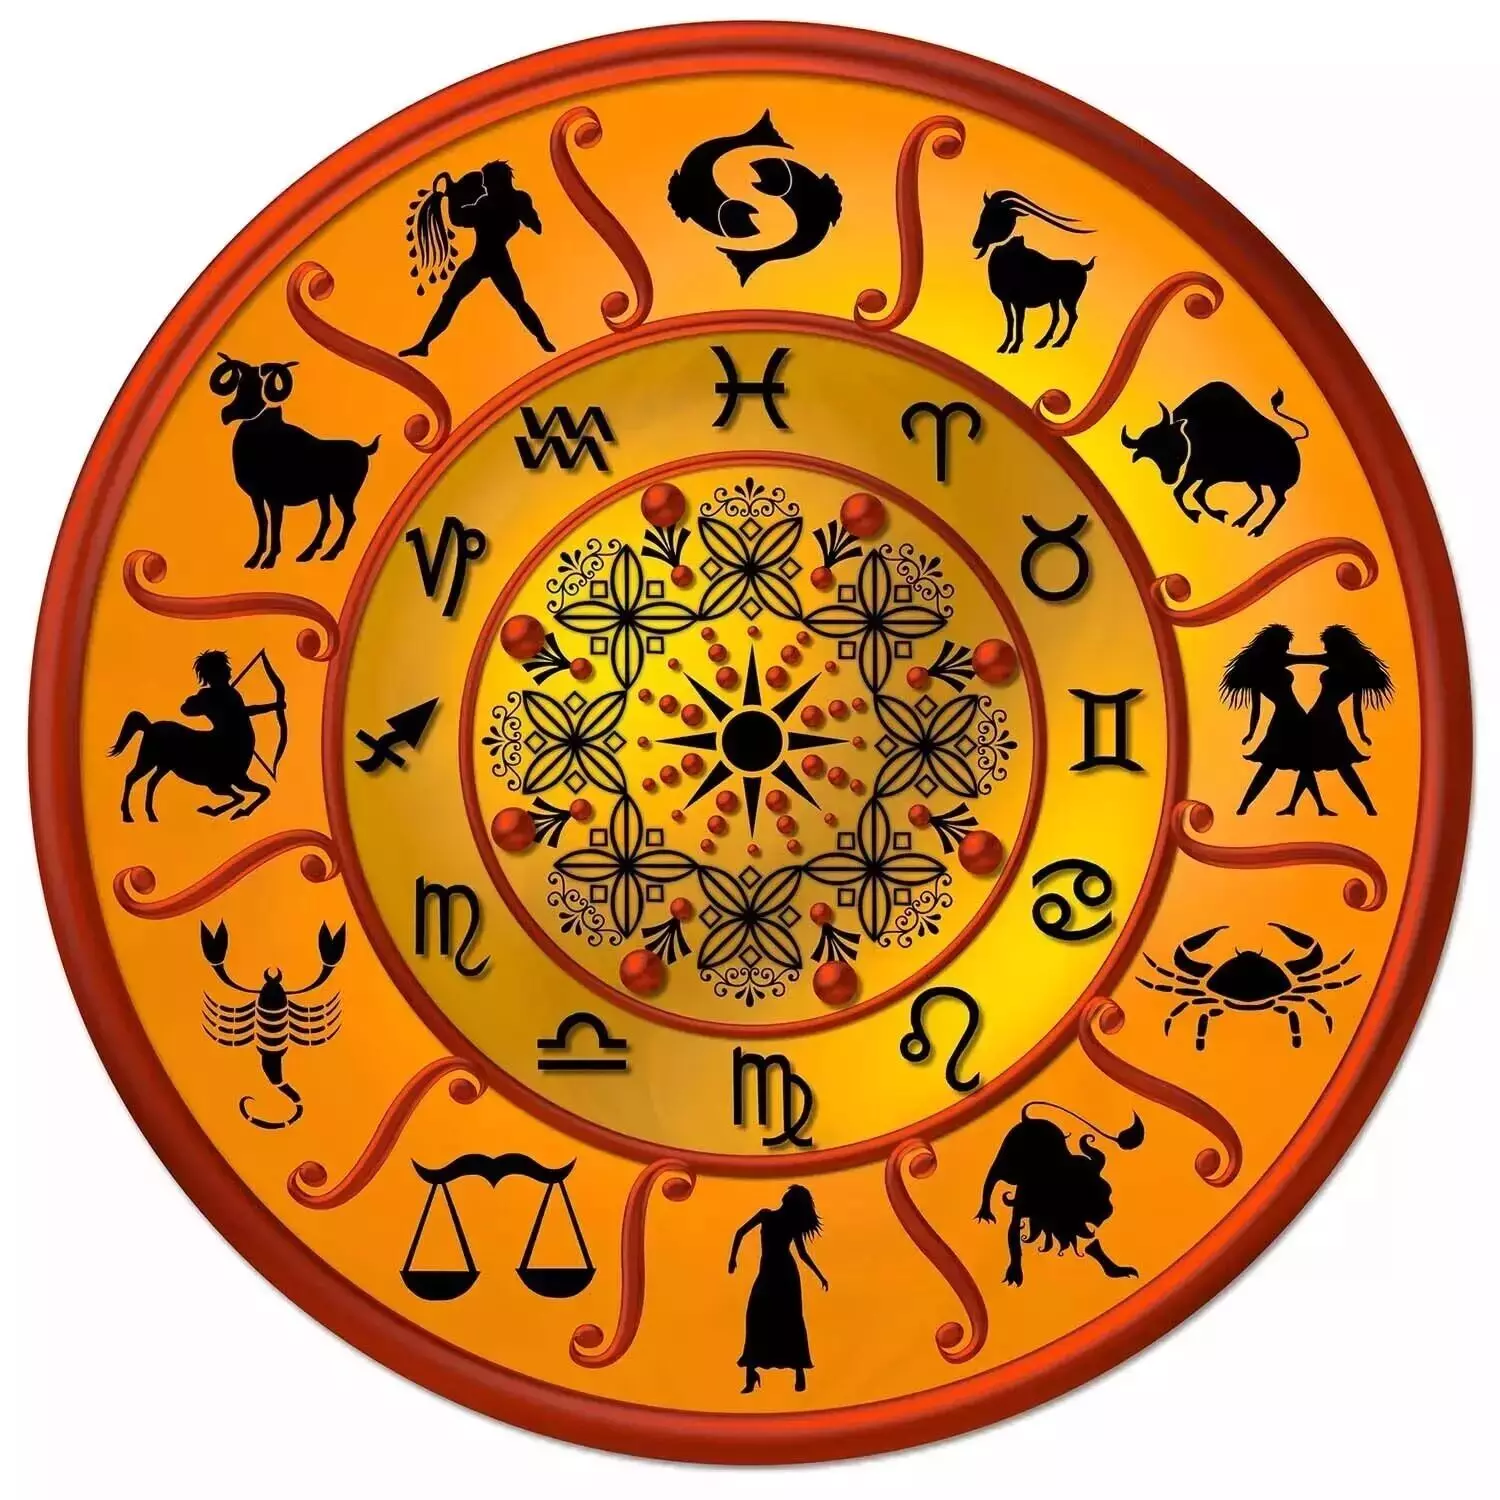 07 August  – Know your todays horoscope